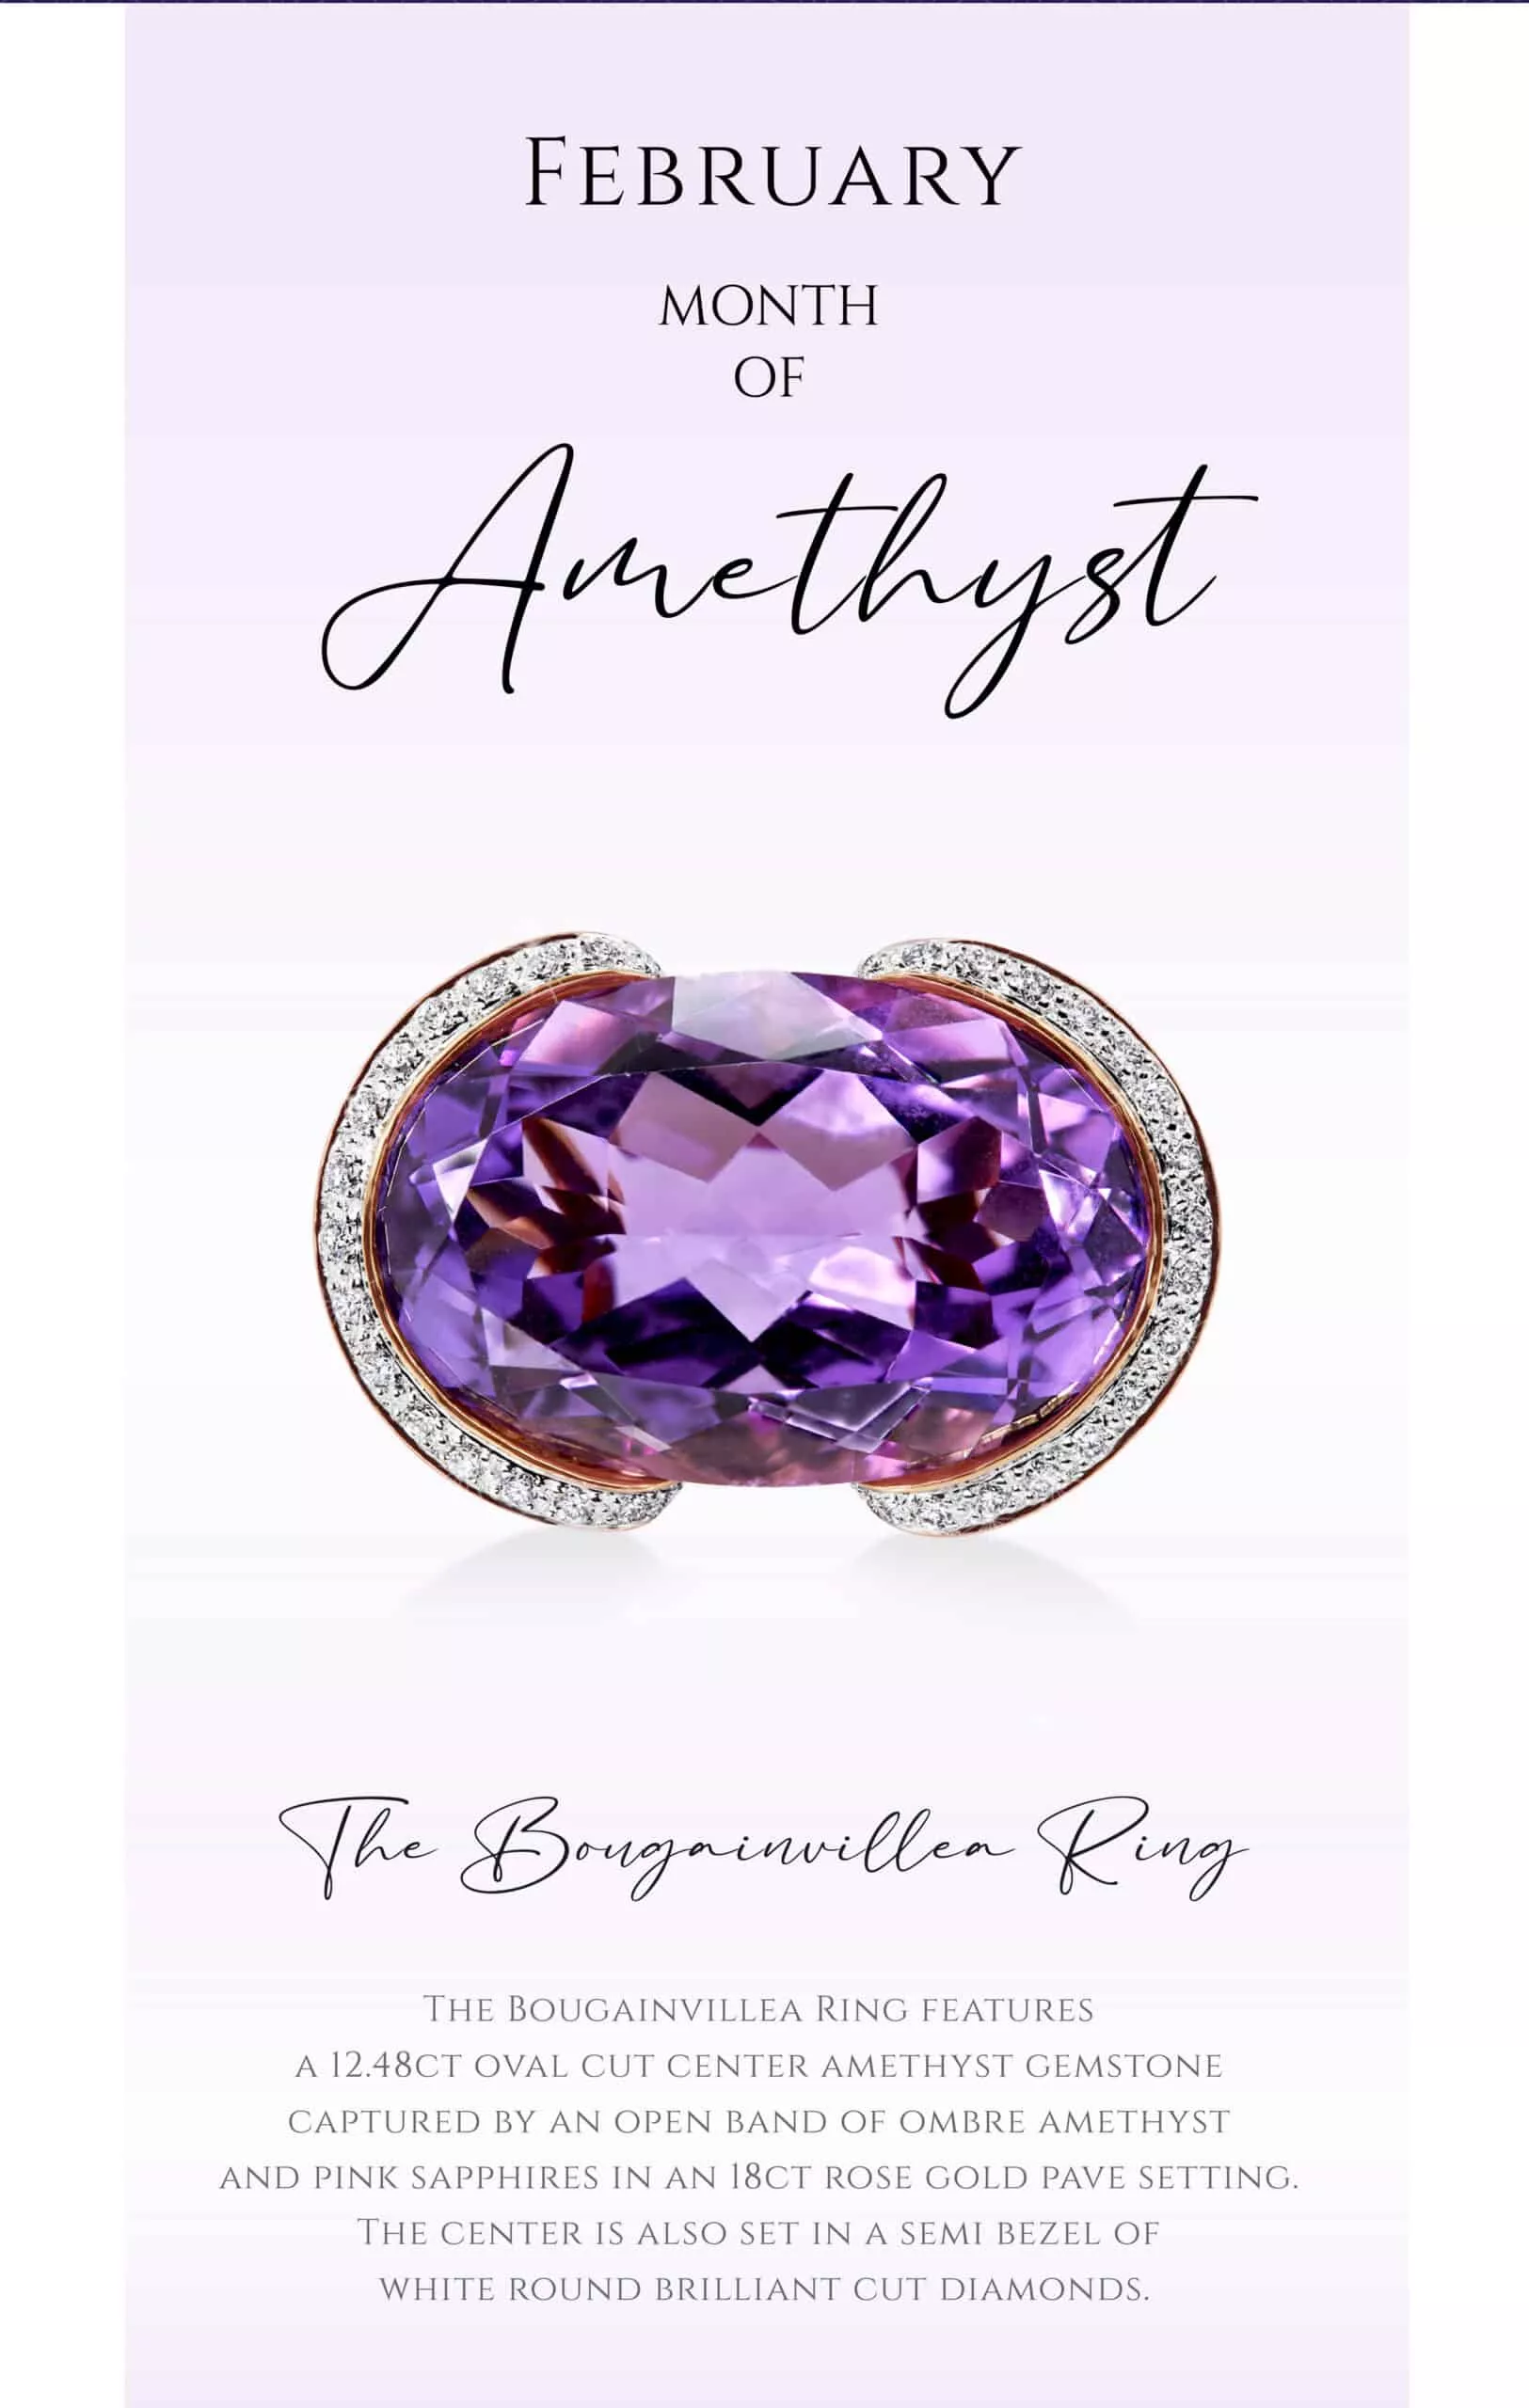 FEBRUARY - MONTH OF AMETHYST